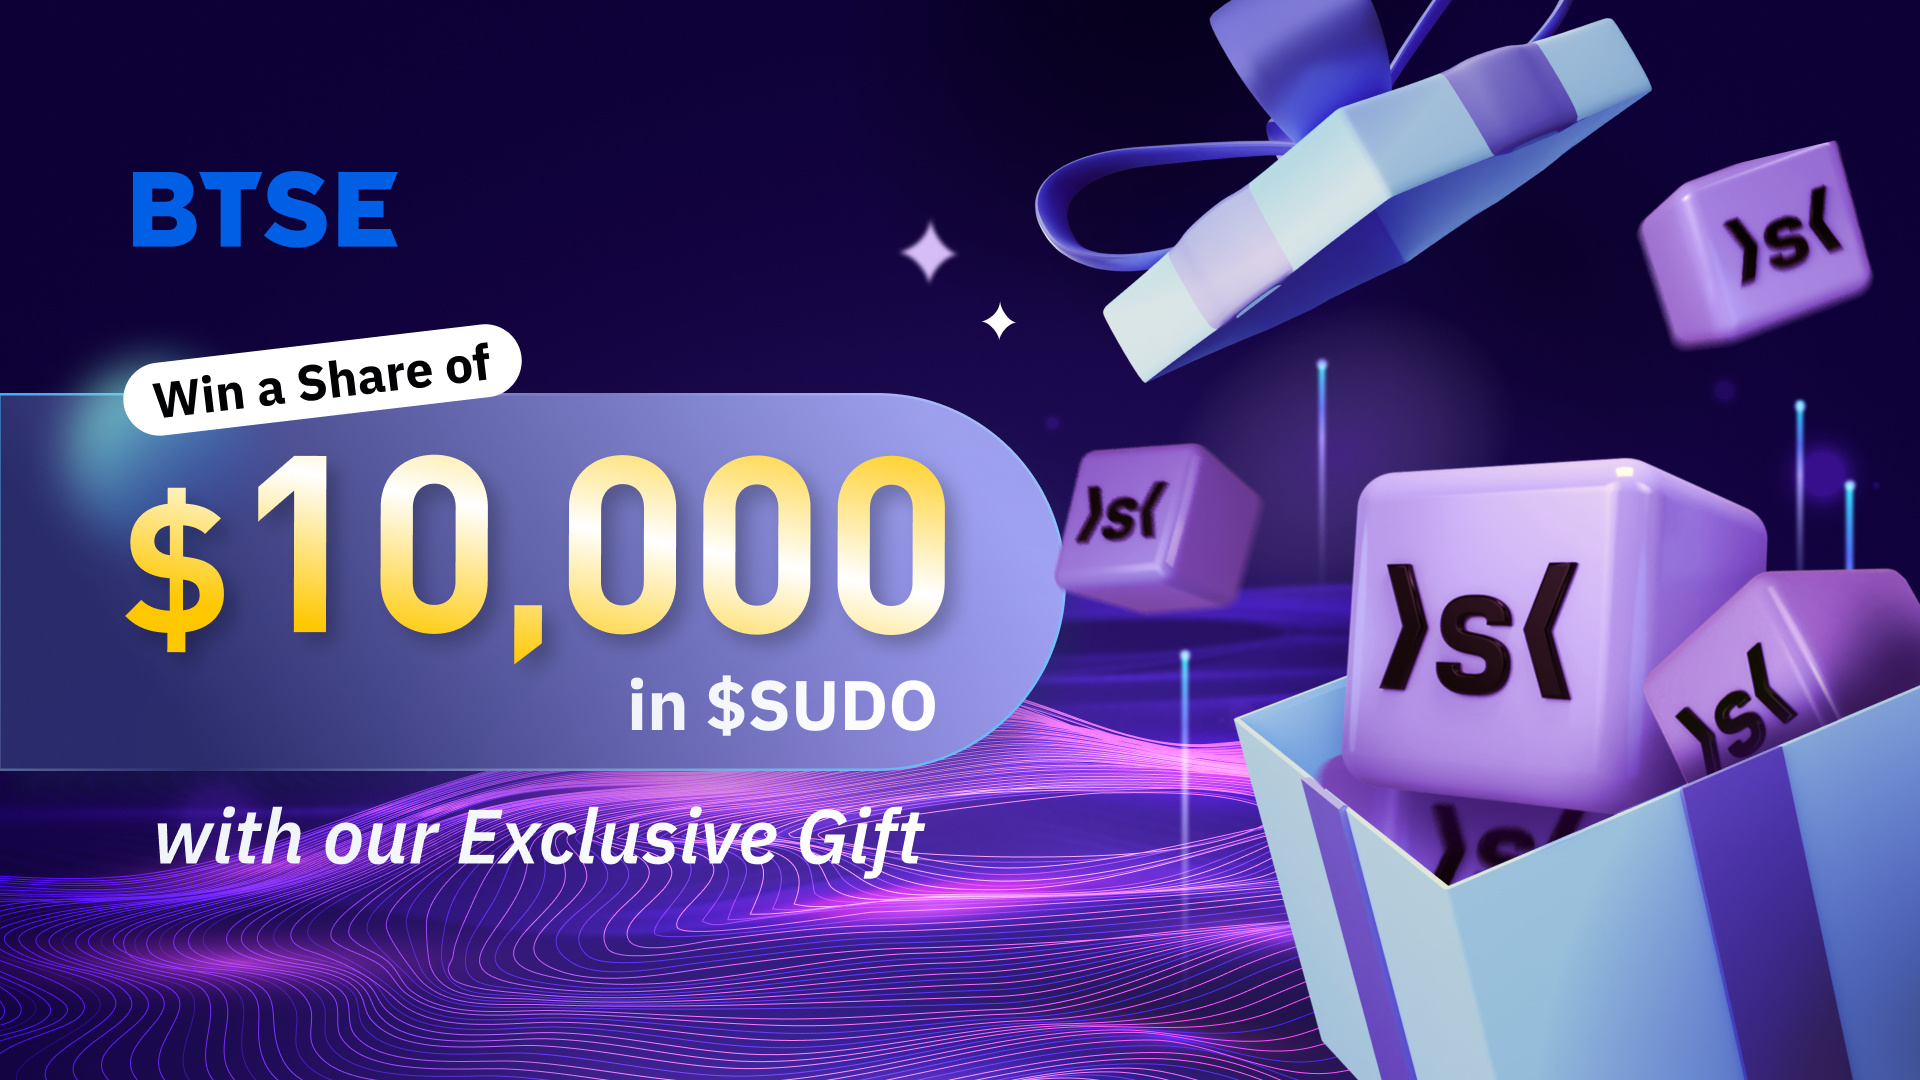 Win a Share of $10,000 in SUDO with Our Exclusive Gift